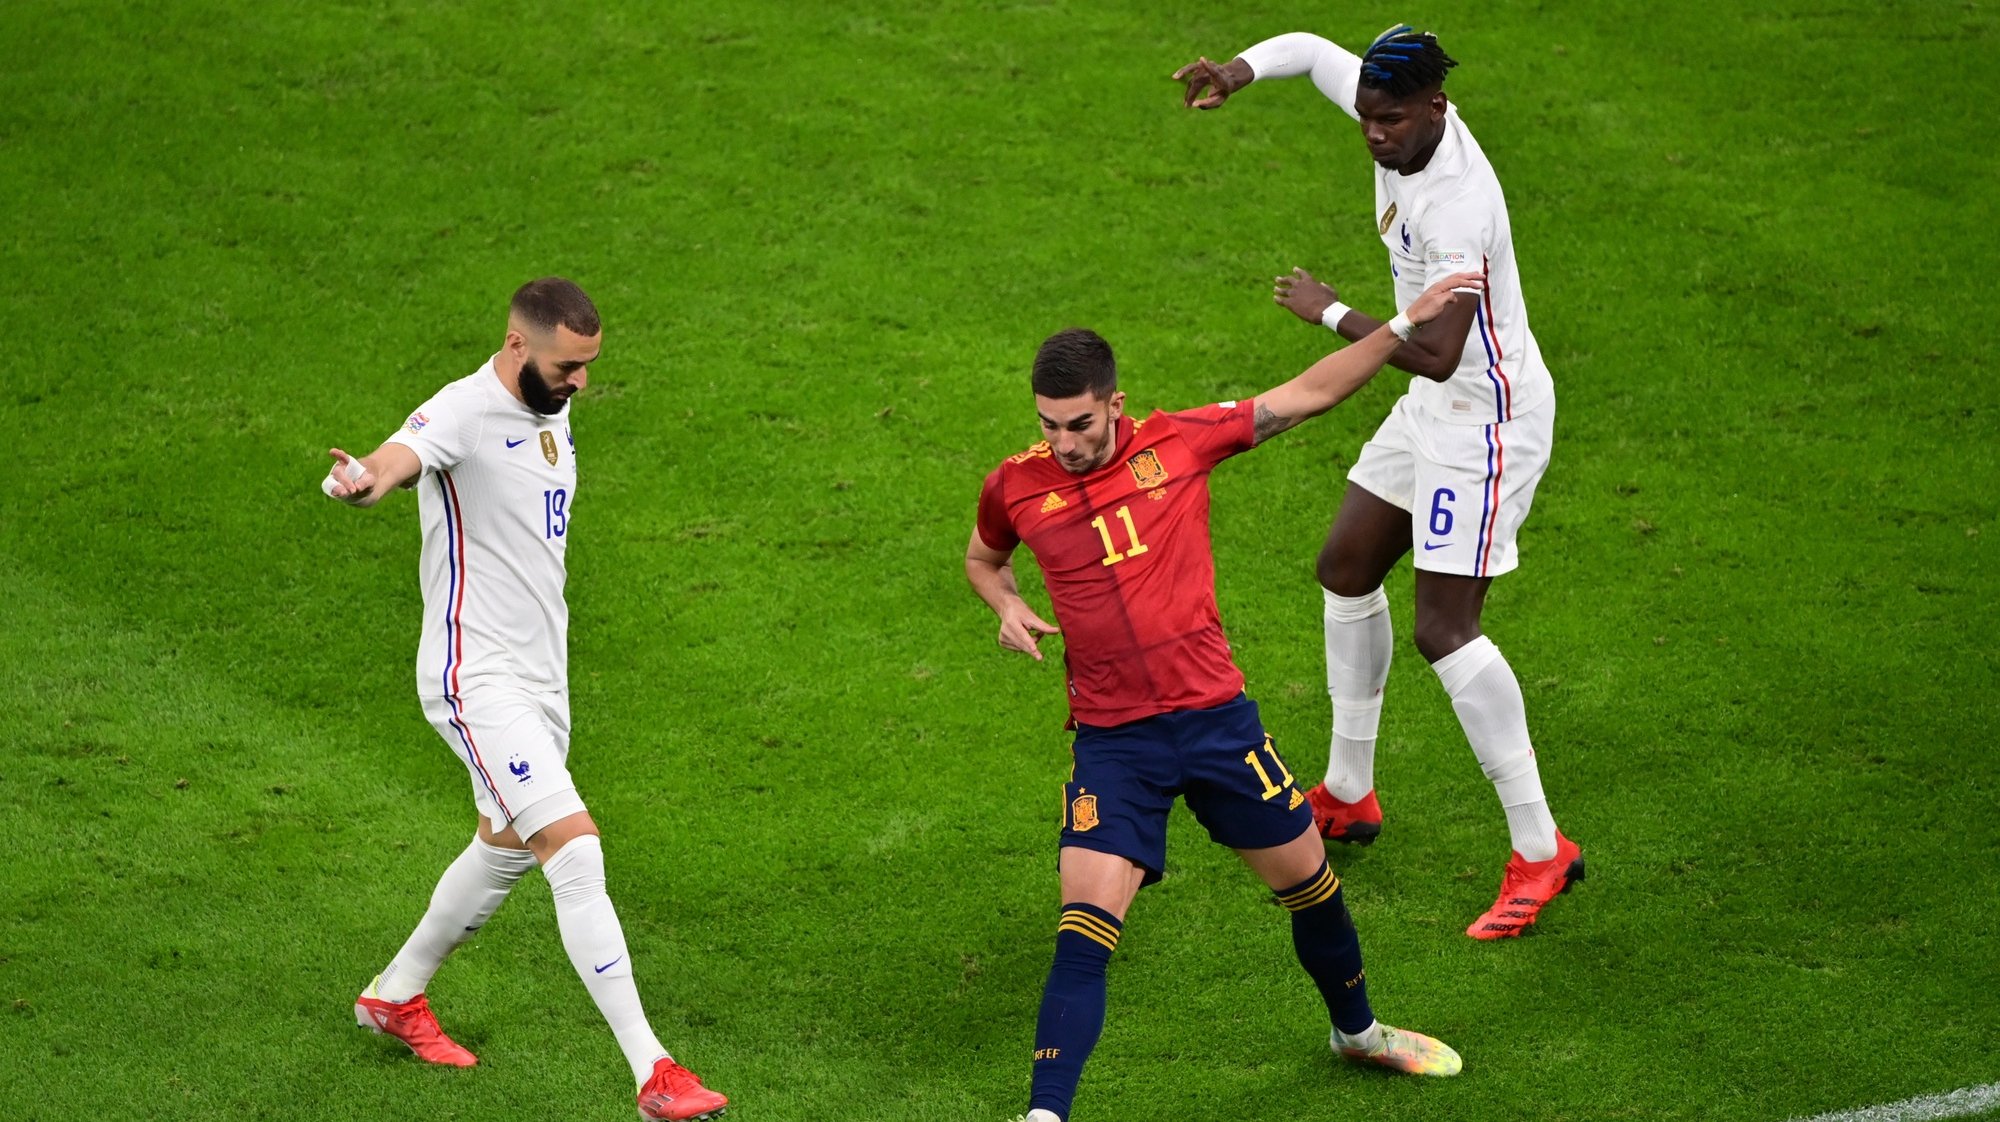 epa09517258 Spain’s Ferran Torres (C) in action against France’s Karim Benzema (L) and Paul Pogba (R) during the UEFA Nations League final between Spain and France in Milan, Italy, 10 October 2021.  EPA/Marco Betorello / POOL